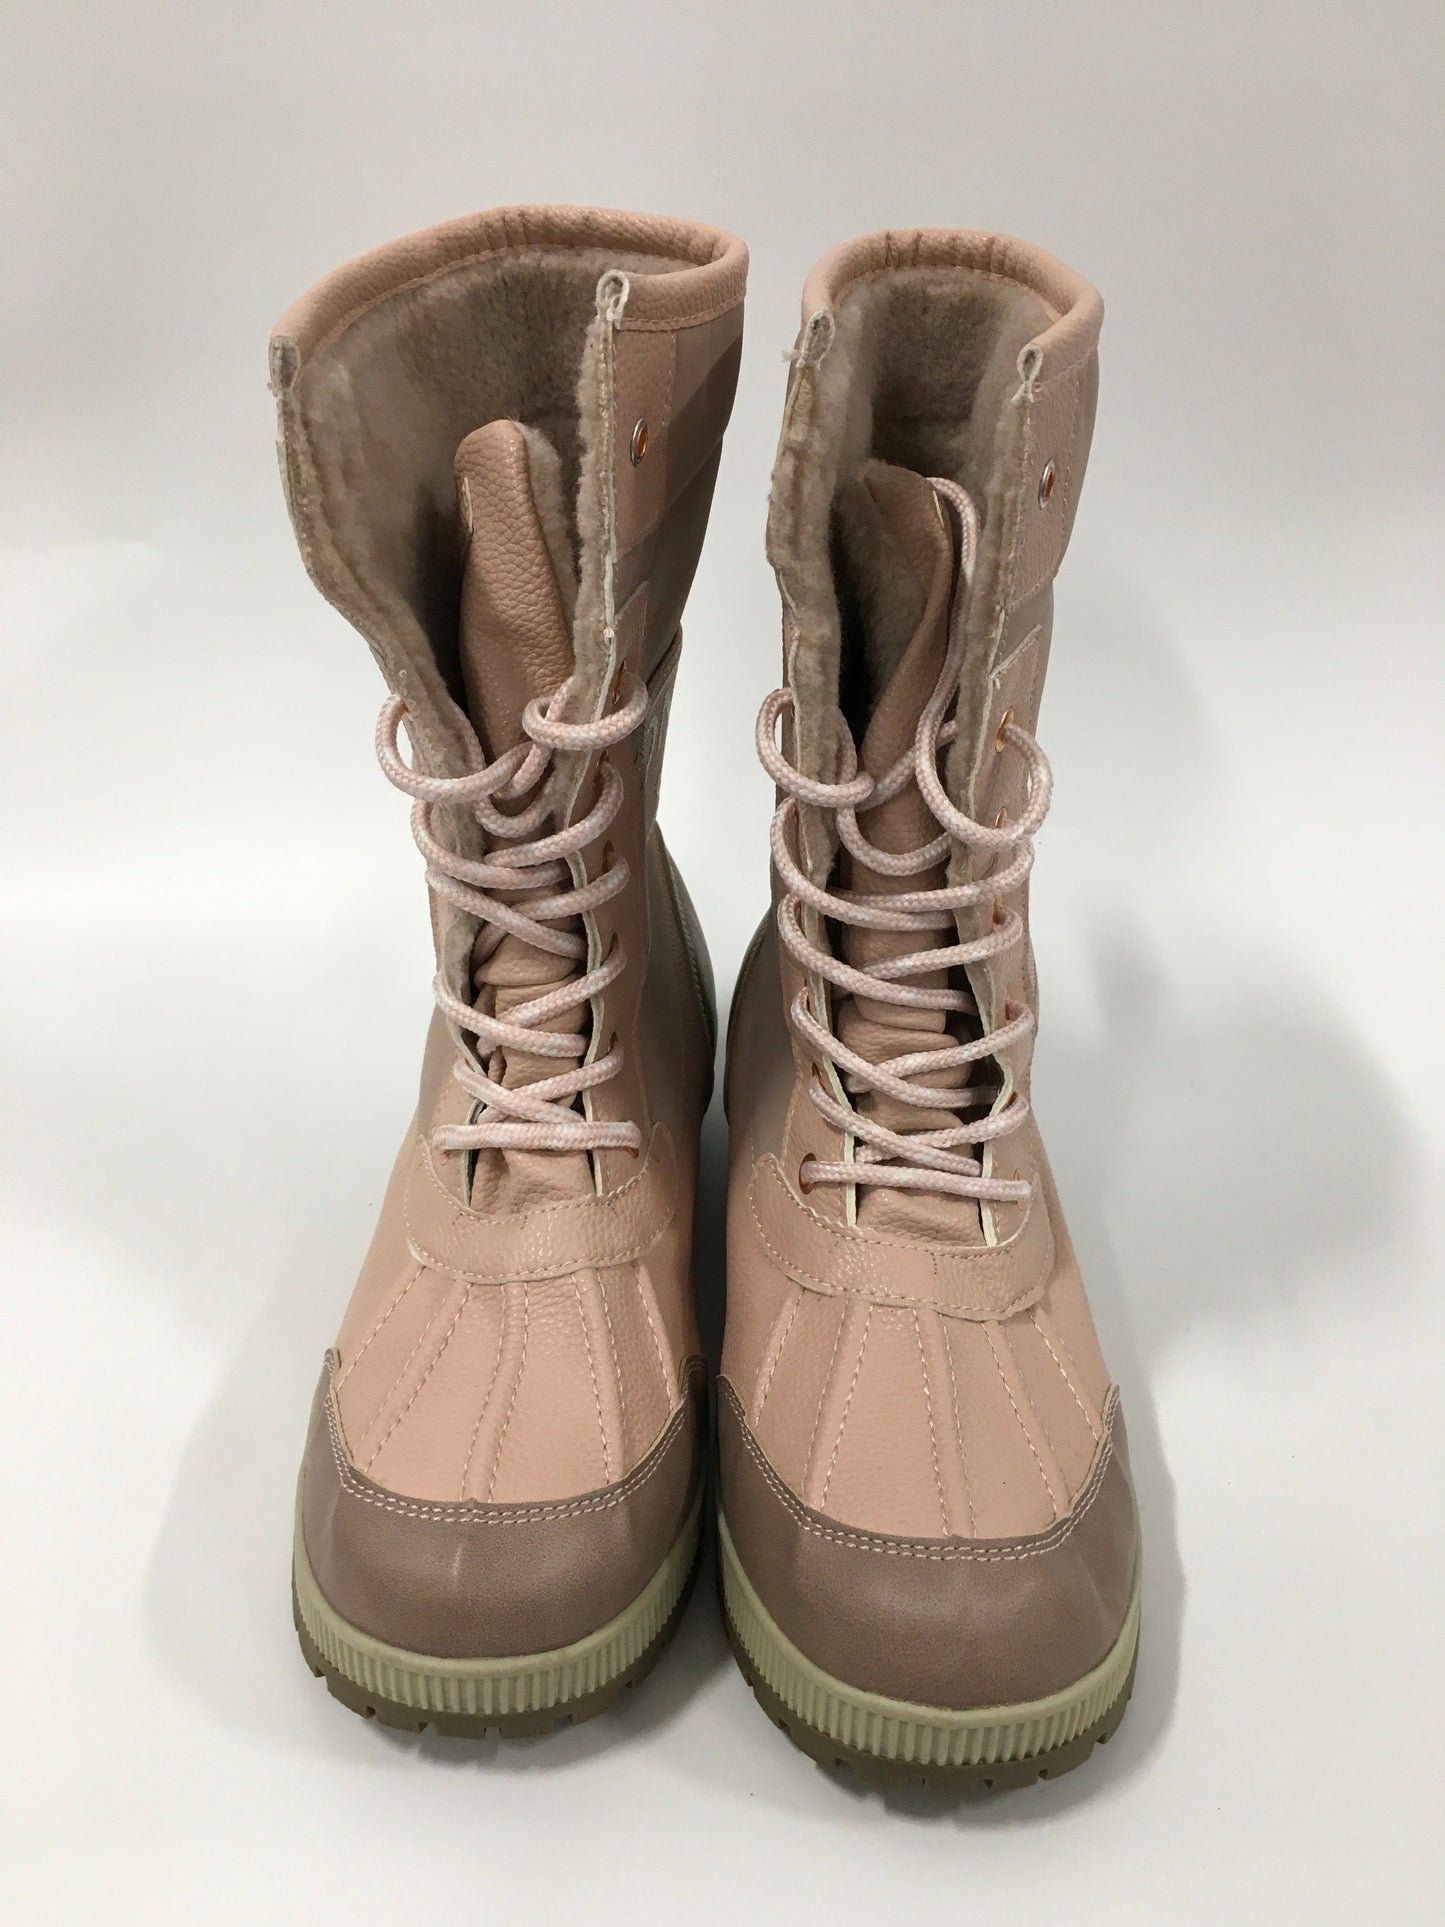 Pink Boots Snow London Fog, Size 9